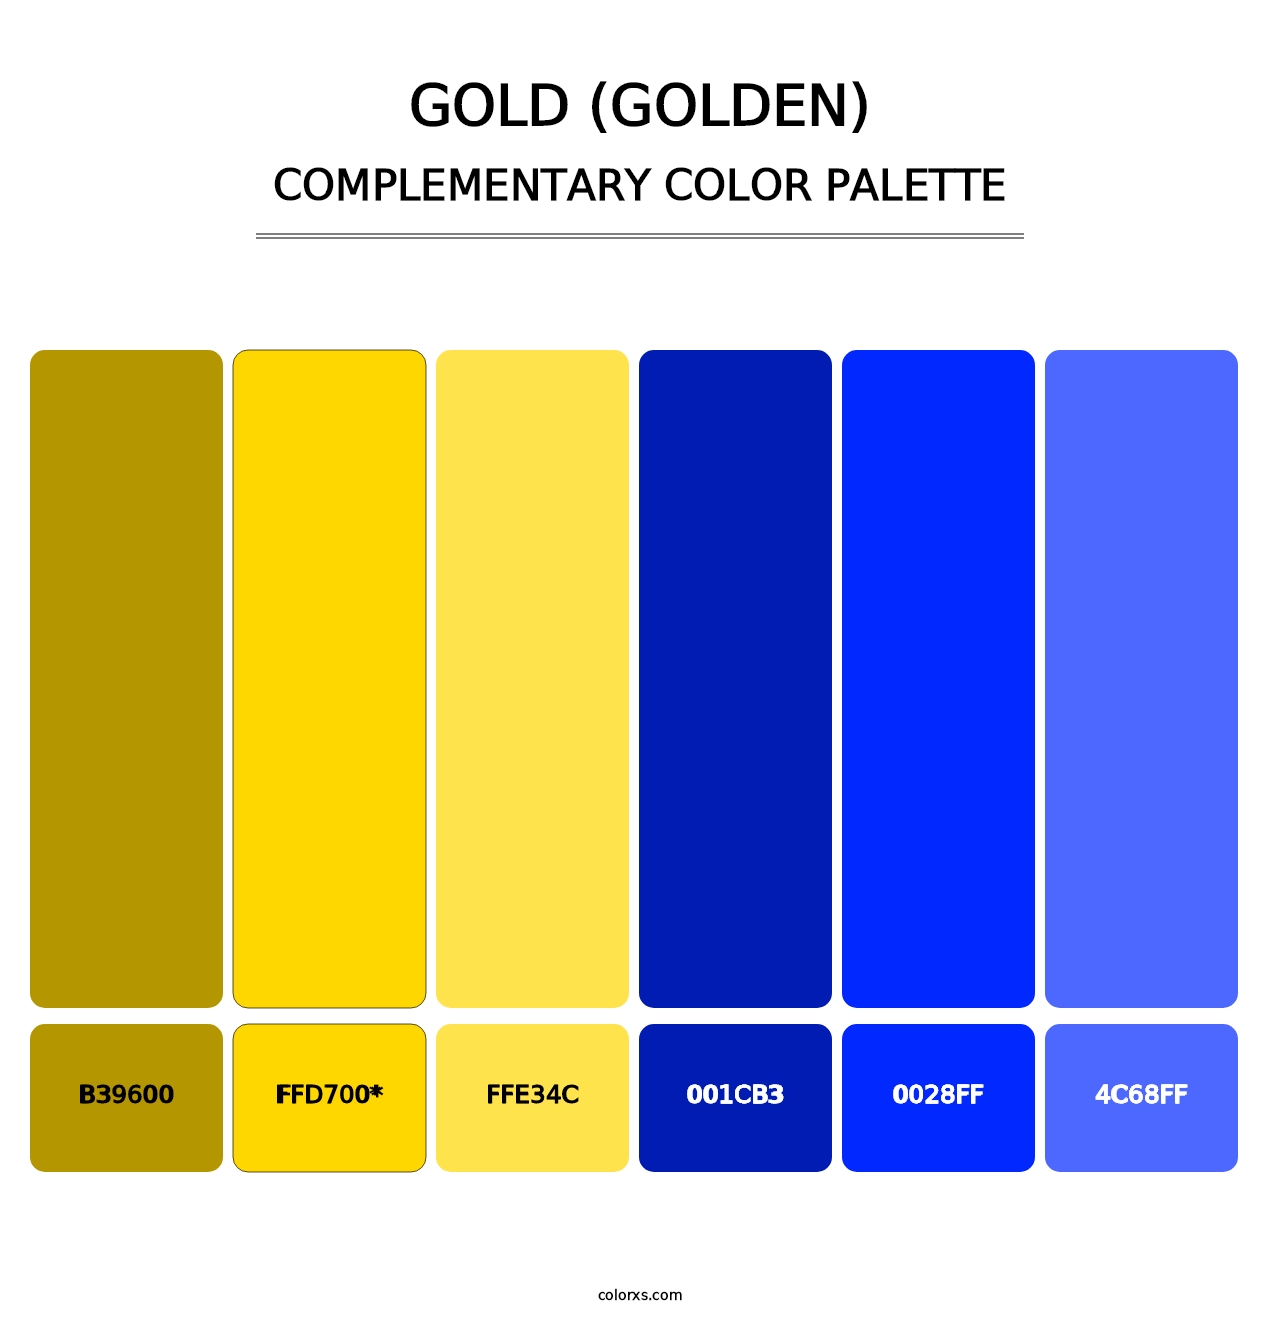 Gold (Golden) - Complementary Color Palette